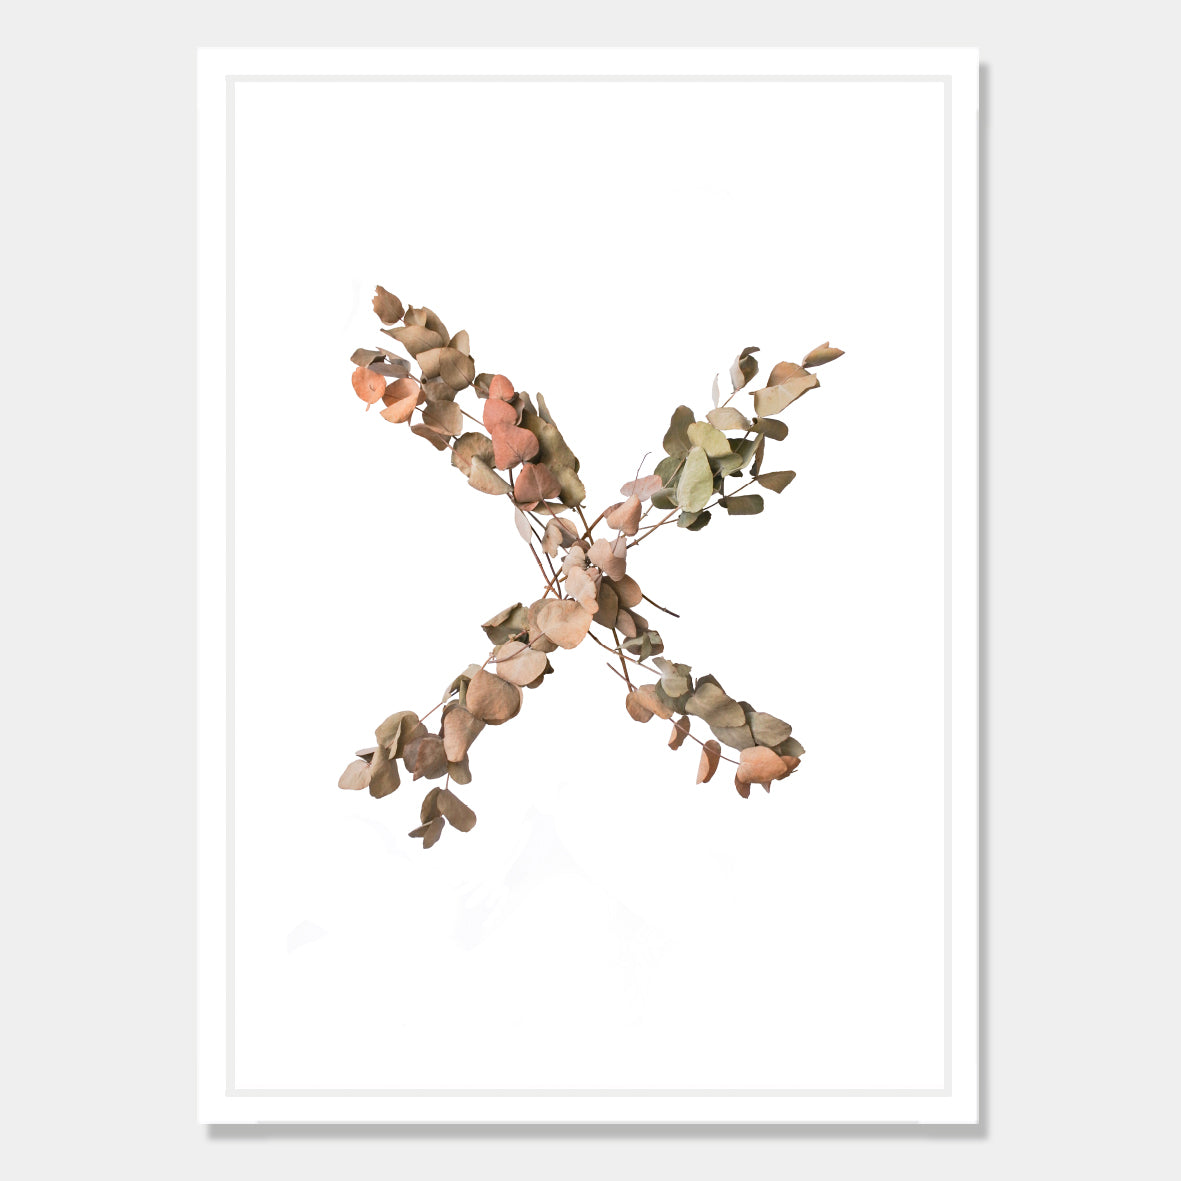 Photographic art print of dried leaves in a X shape by Bon Jung. Printed in New Zealand by endemicworld and framed in white.